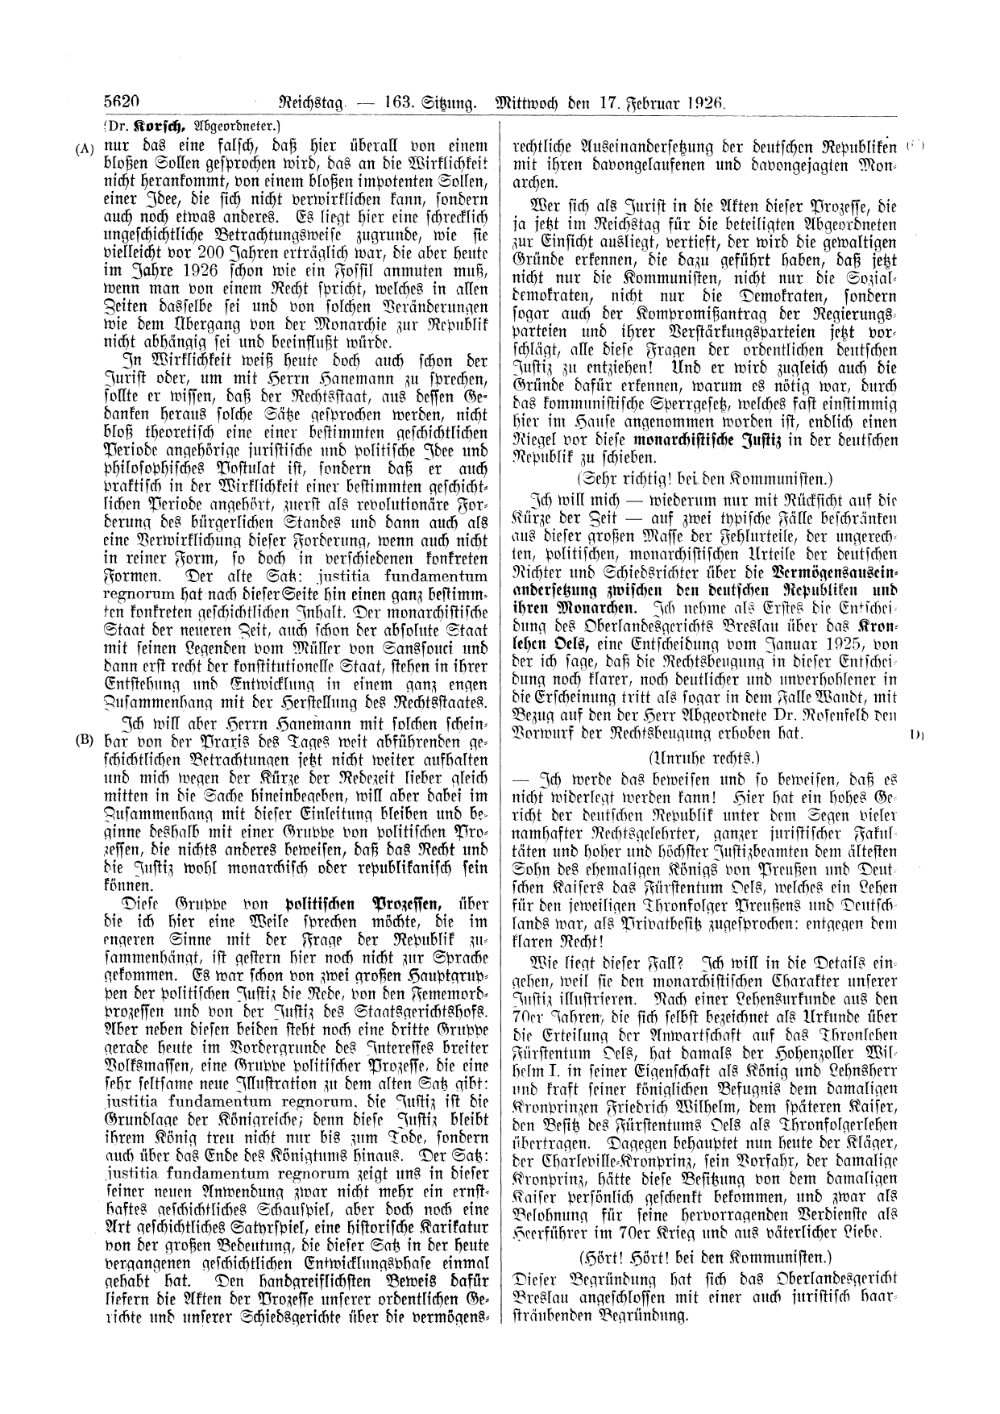 Scan of page 5620